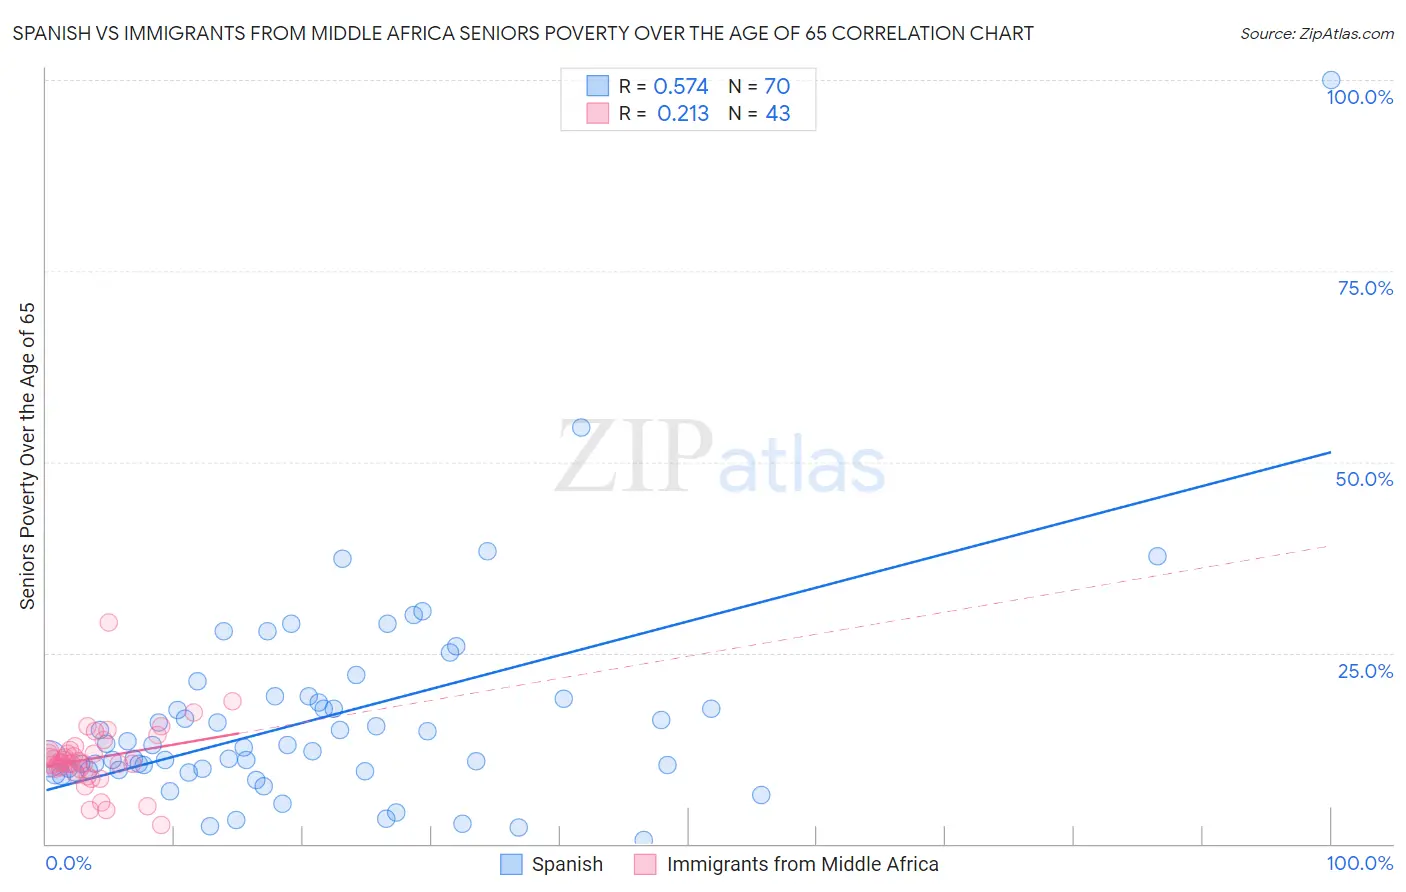 Spanish vs Immigrants from Middle Africa Seniors Poverty Over the Age of 65